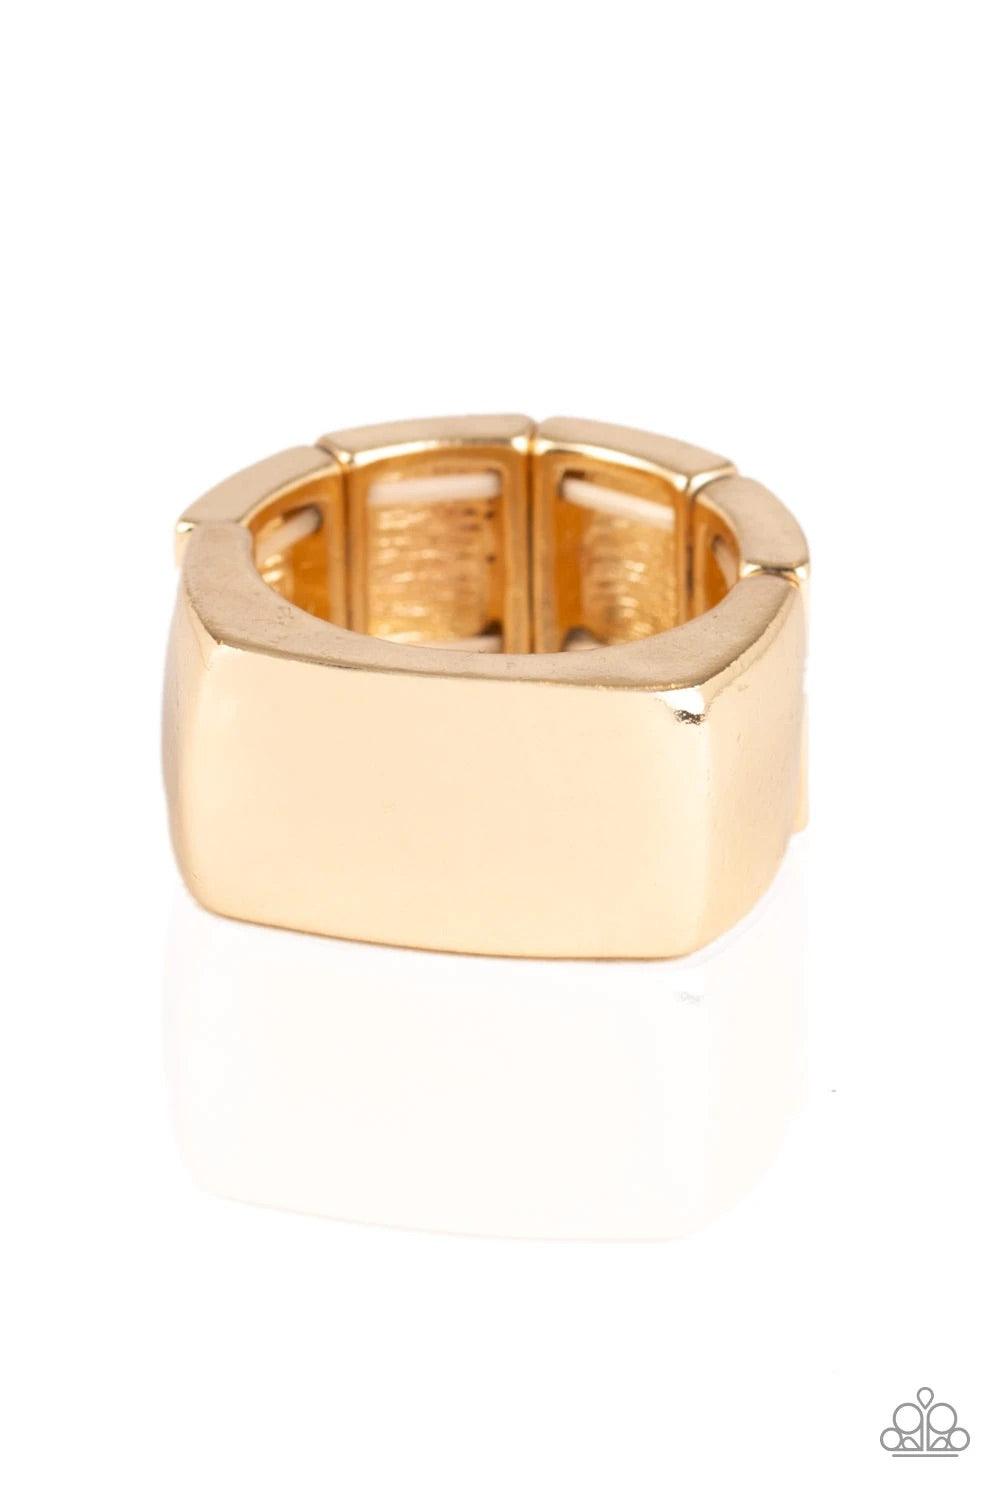 Paparazzi Accessories Straightforward - Gold Brushed in a high sheen finish, a reflective rectangular frame sits atop the finger for a sleek look. Features a stretchy band for a flexible fit. Sold as one individual ring. Jewelry